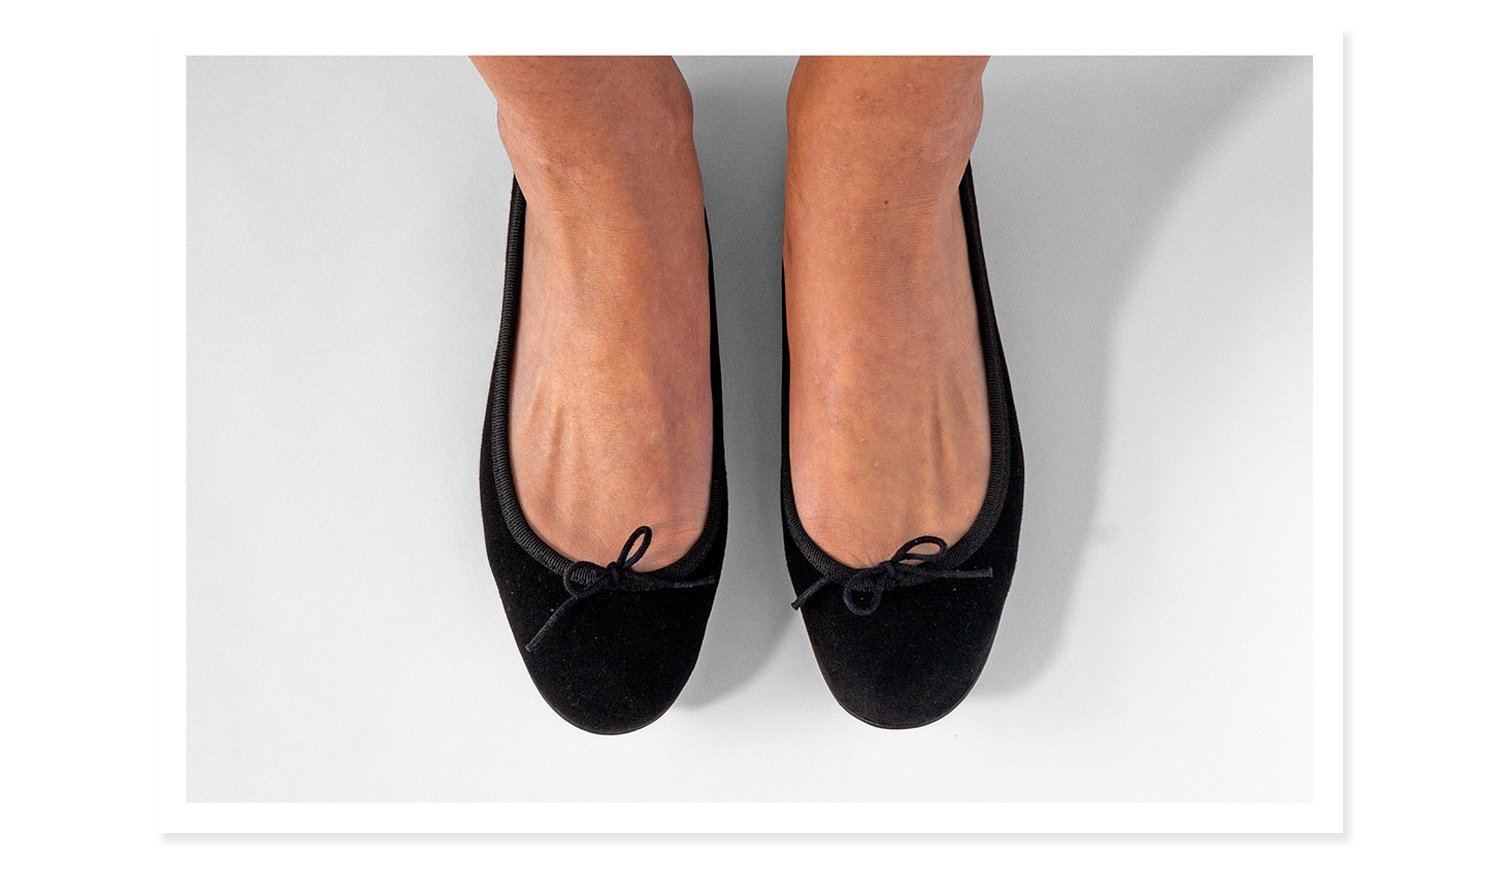 Repetto Cendrillon Flats Review: Sizing is tricky to say the least